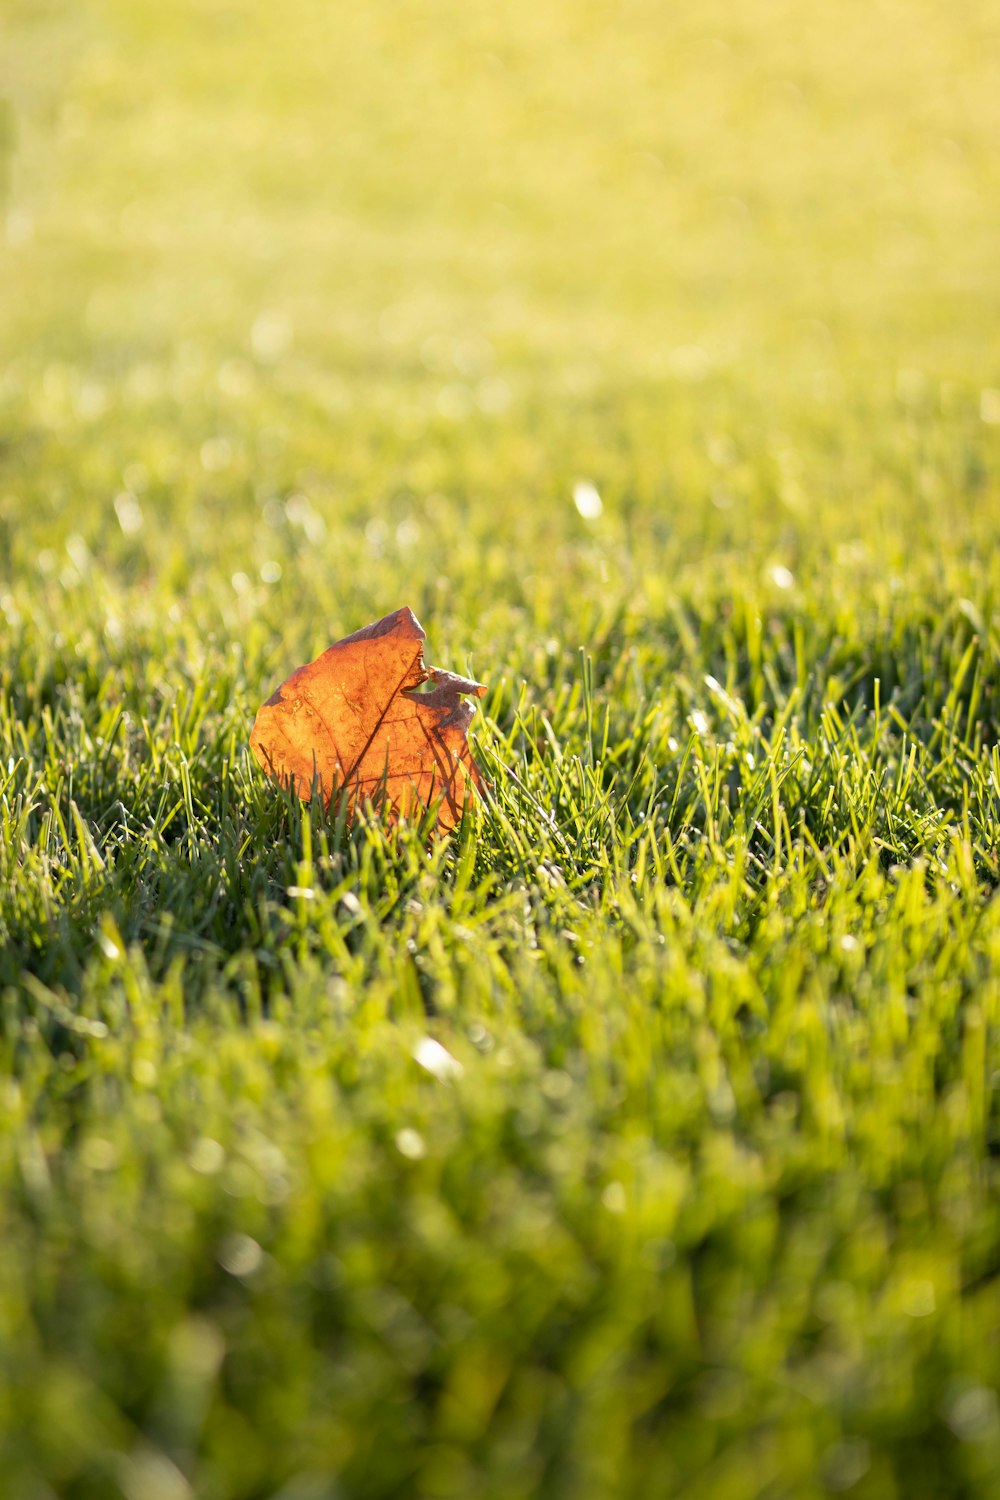 brown and black butterfly on green grass during daytime